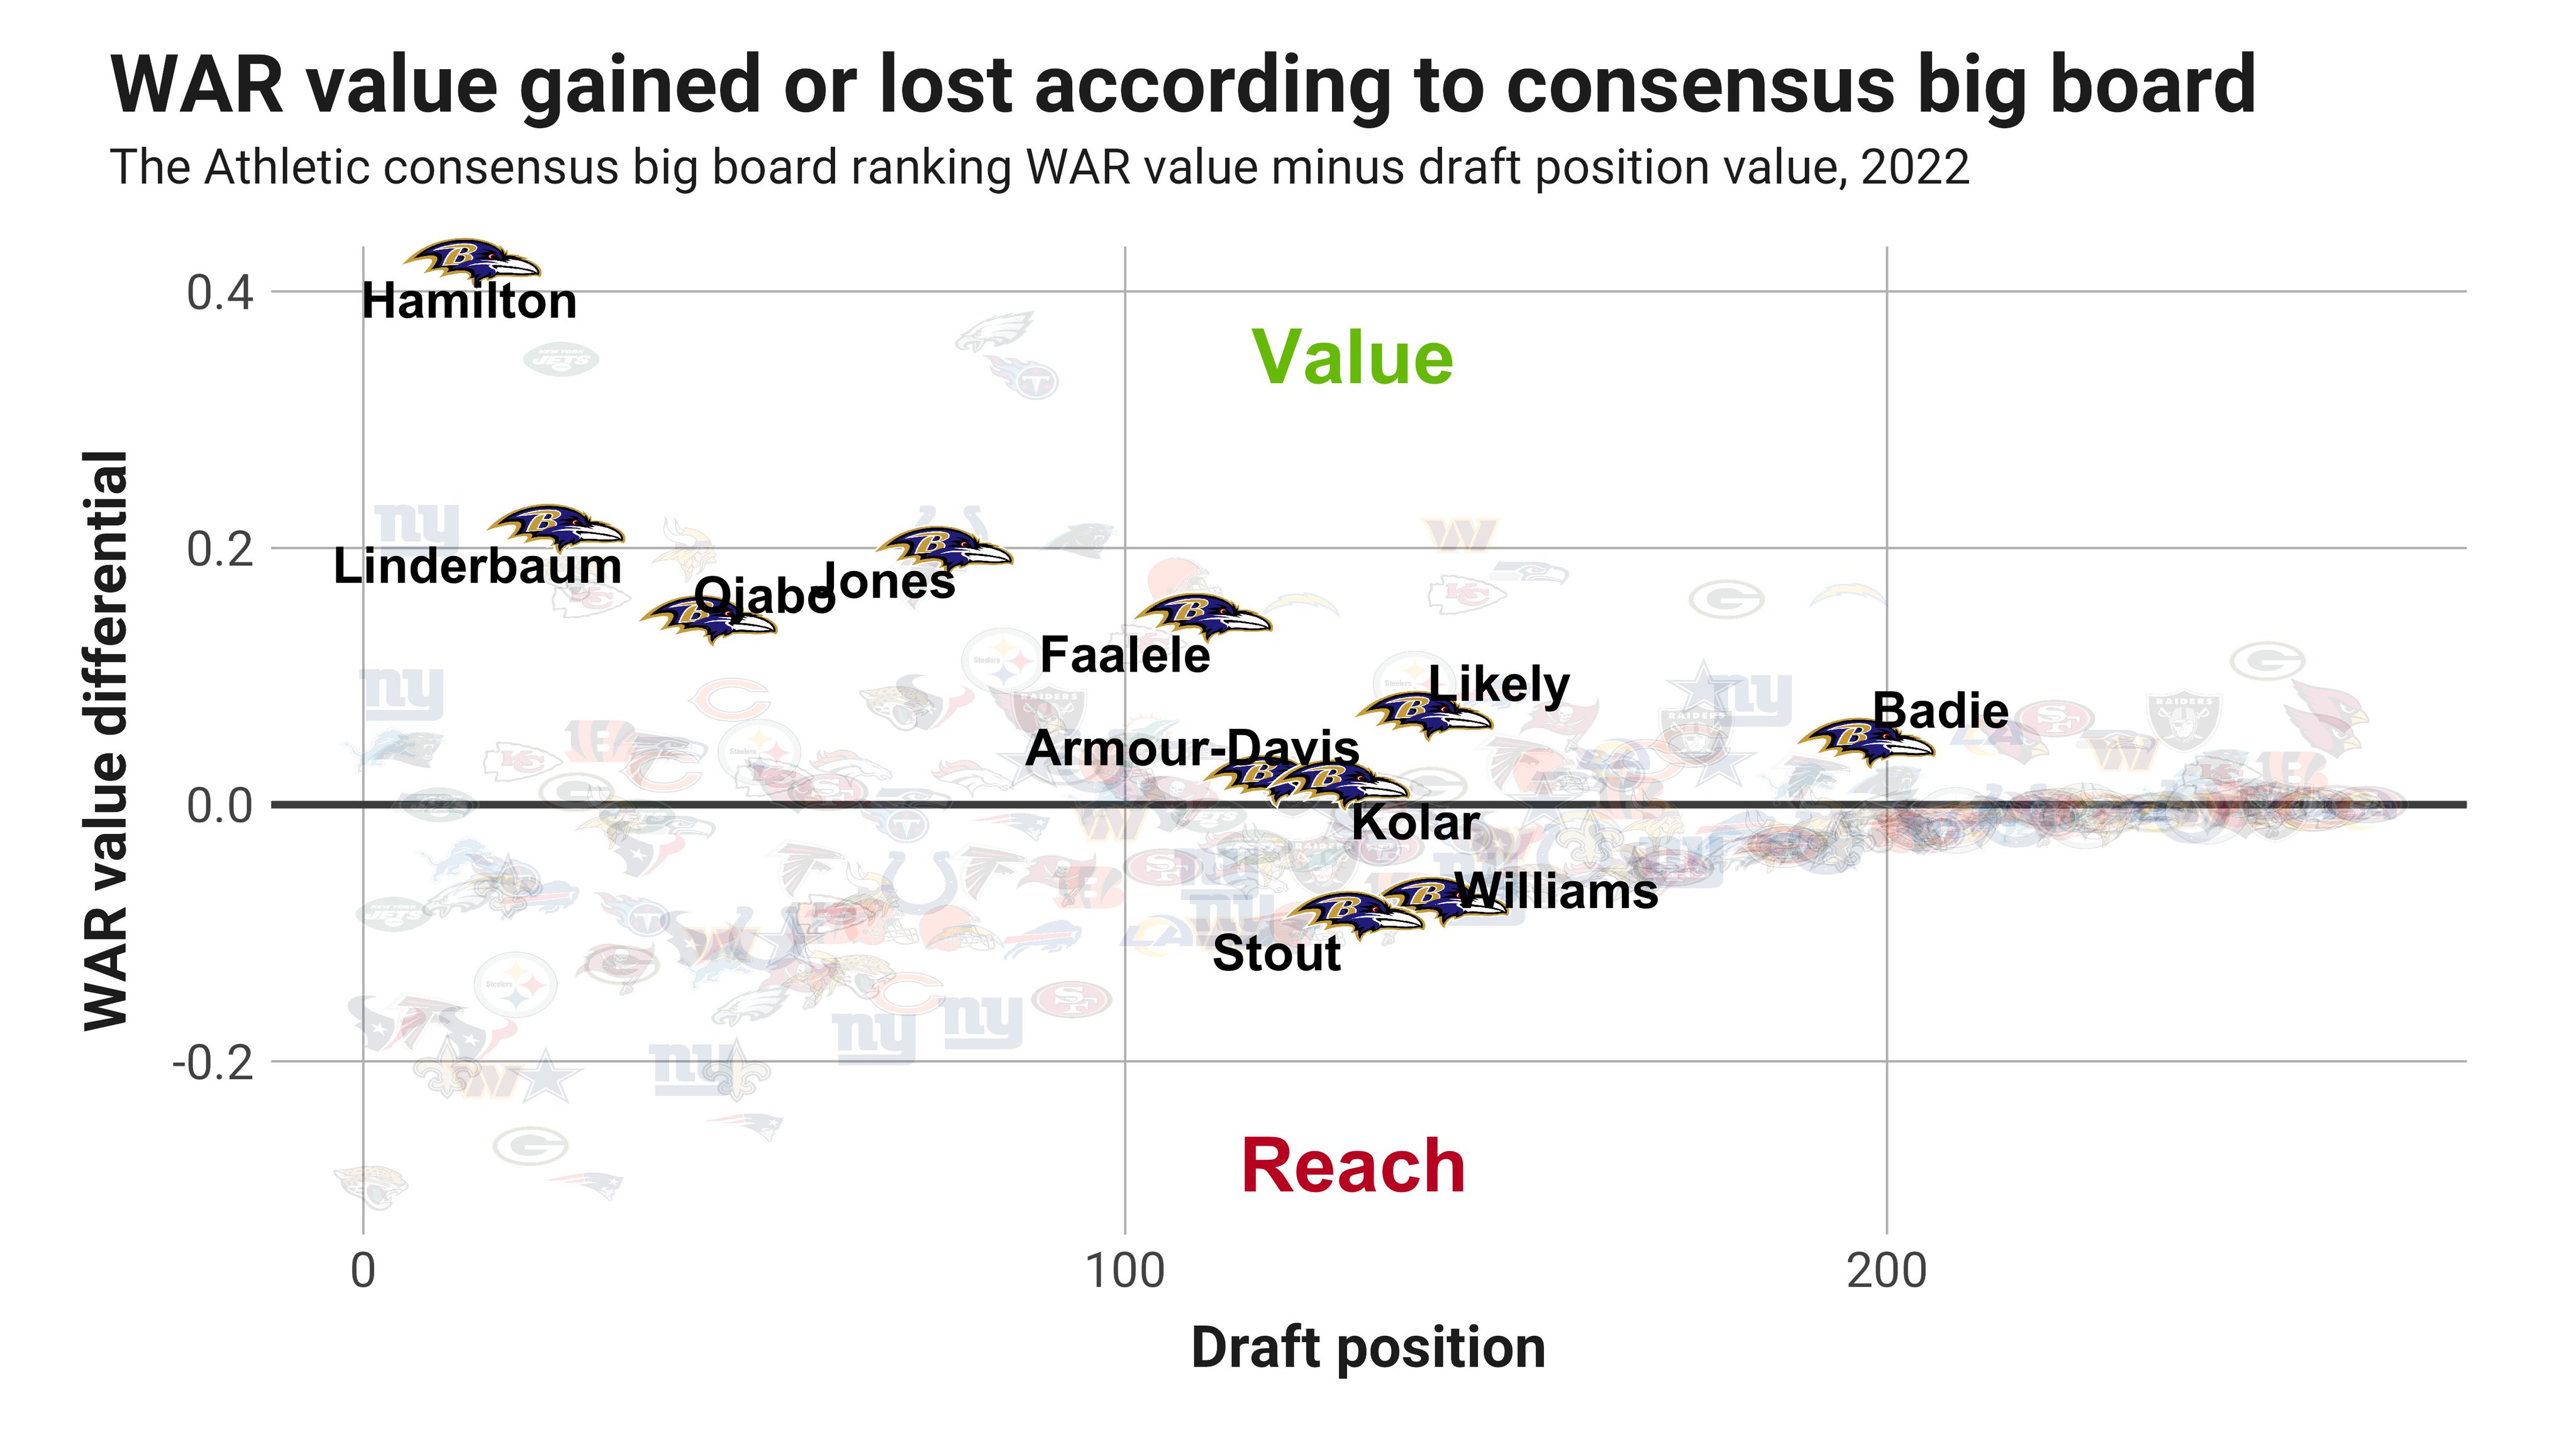 Kevin Cole on Twitter: 'The team with the most WAR value gained according  to the consensus big board for the 2022 NFL draft is .. The Baltimore  Ravens. 1.1 WAR gained on